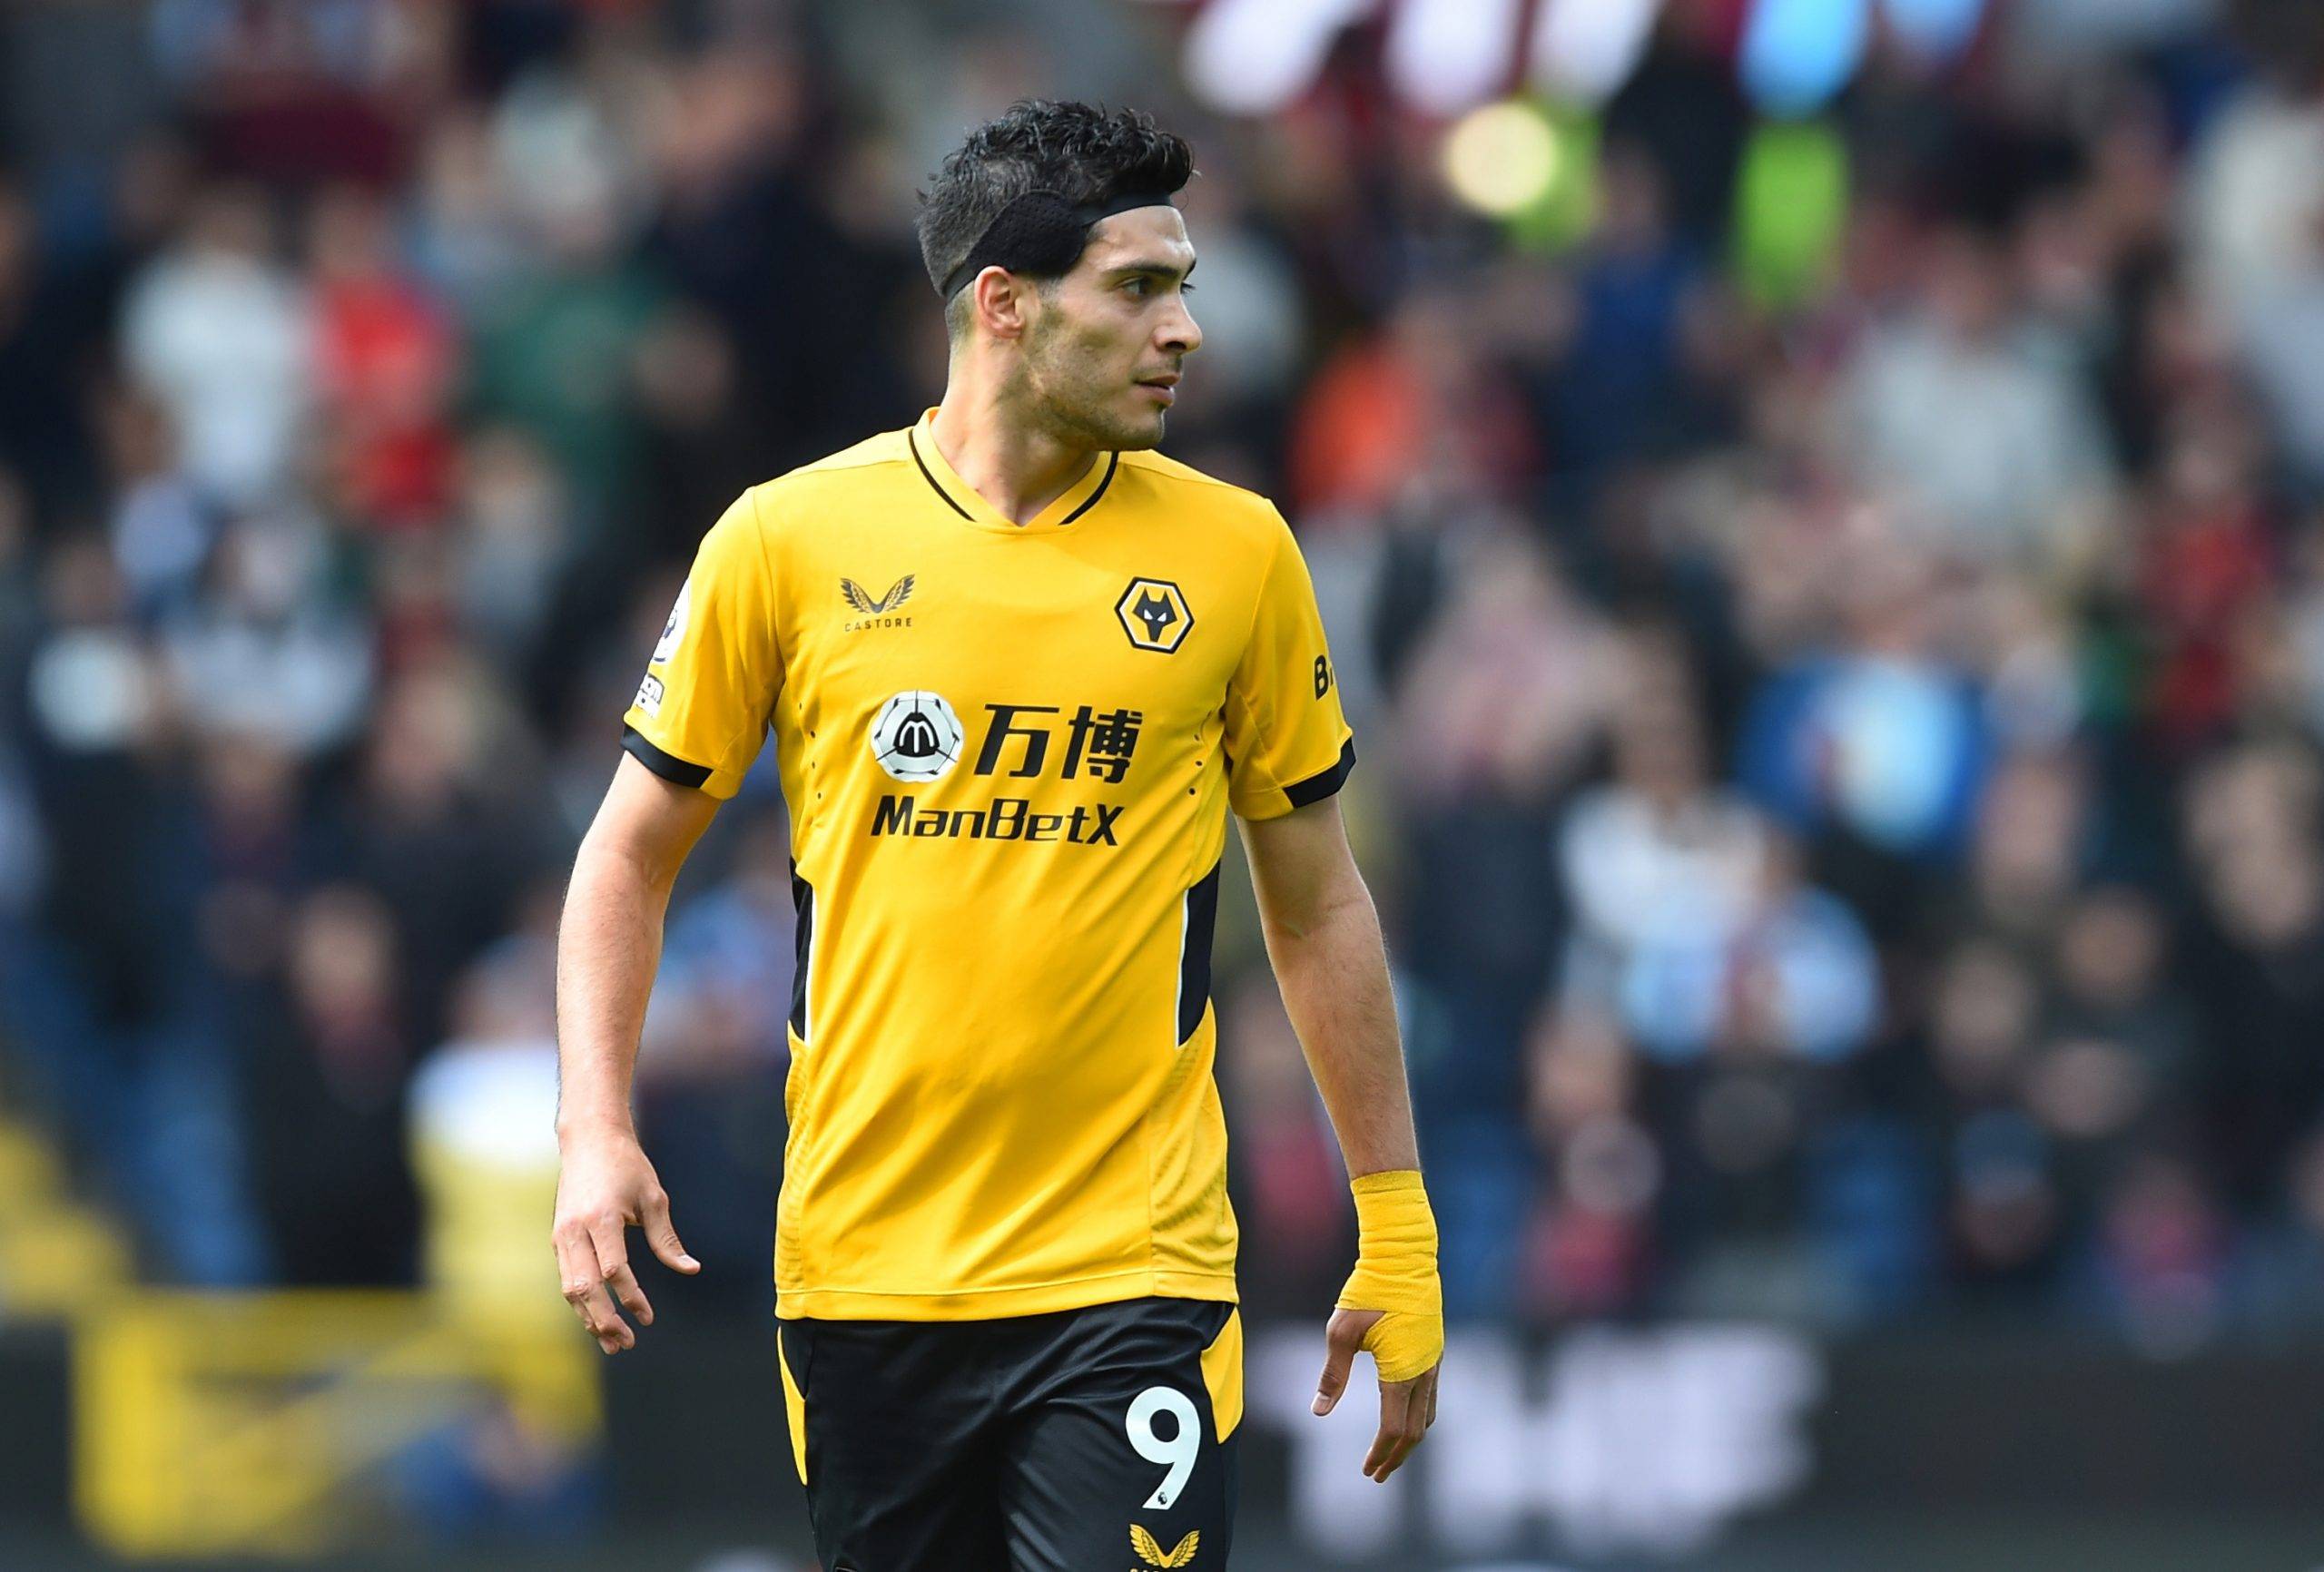 Wolves: Sky Sports journalist slams Costa, Podence, Gomes and Jimenez's cameo appearances - Podcasts